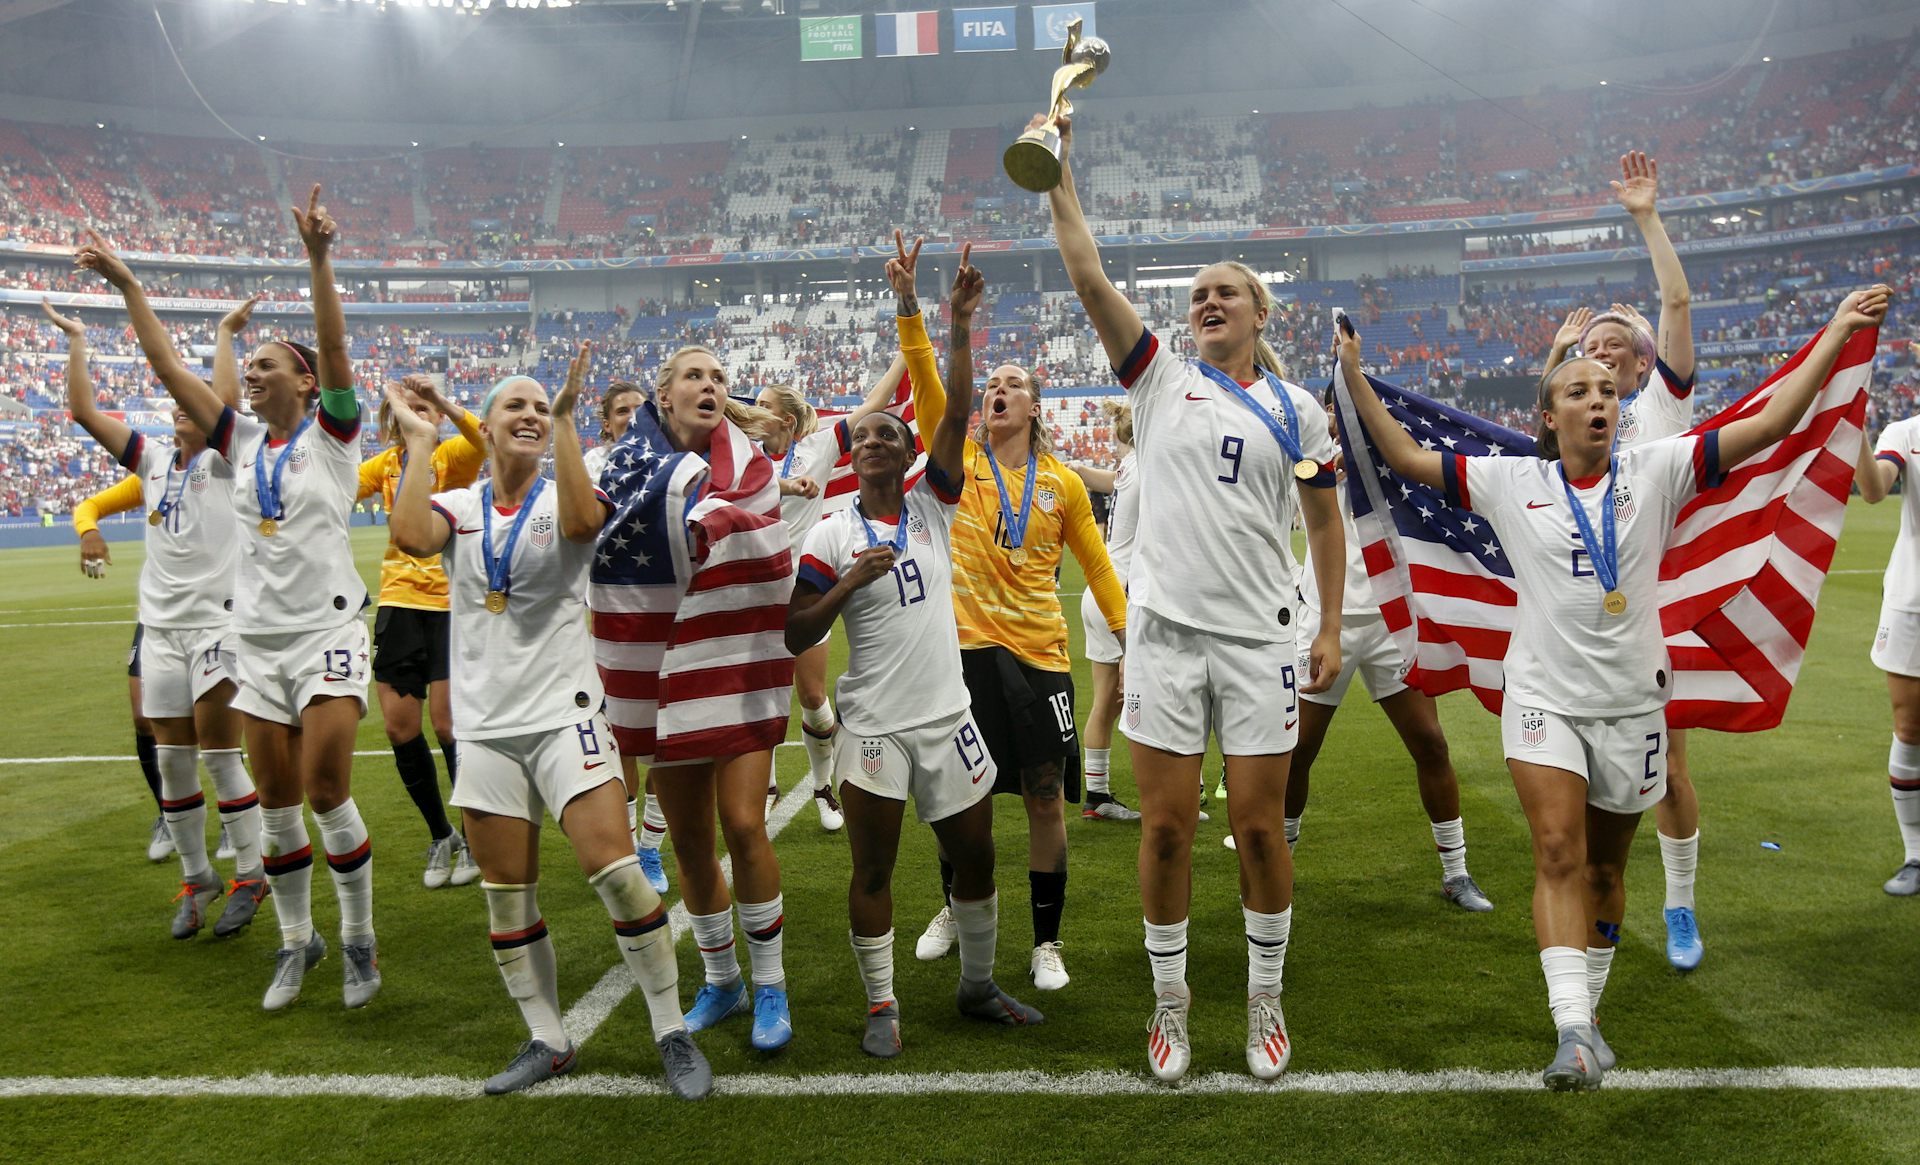 Womens World Cup will highlight how far other countries have closed the gap with US pic